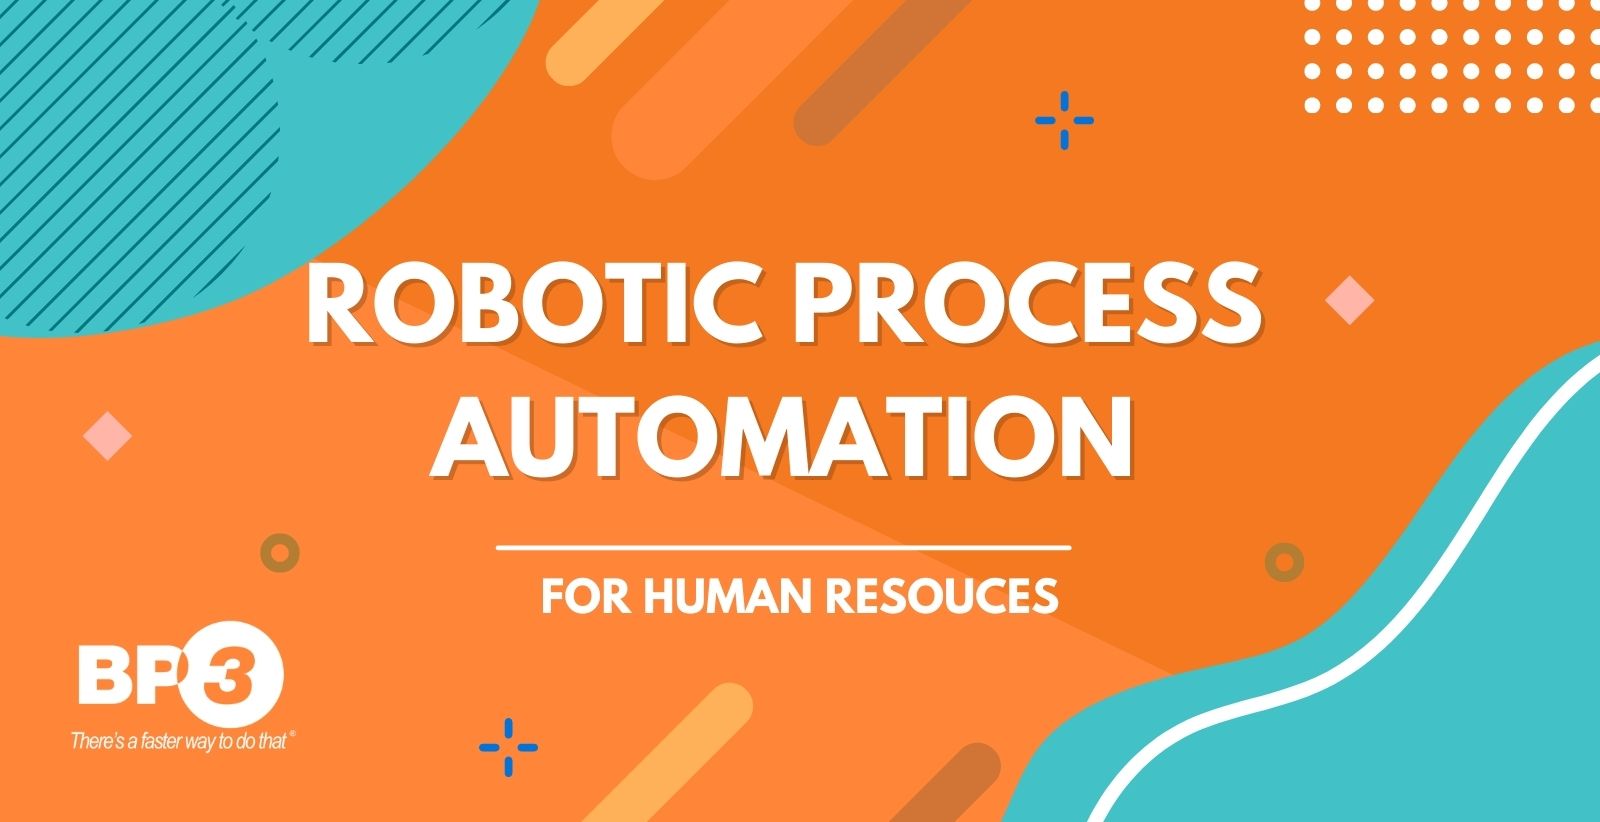 Robotic Process Automation (RPA) for Human Resources